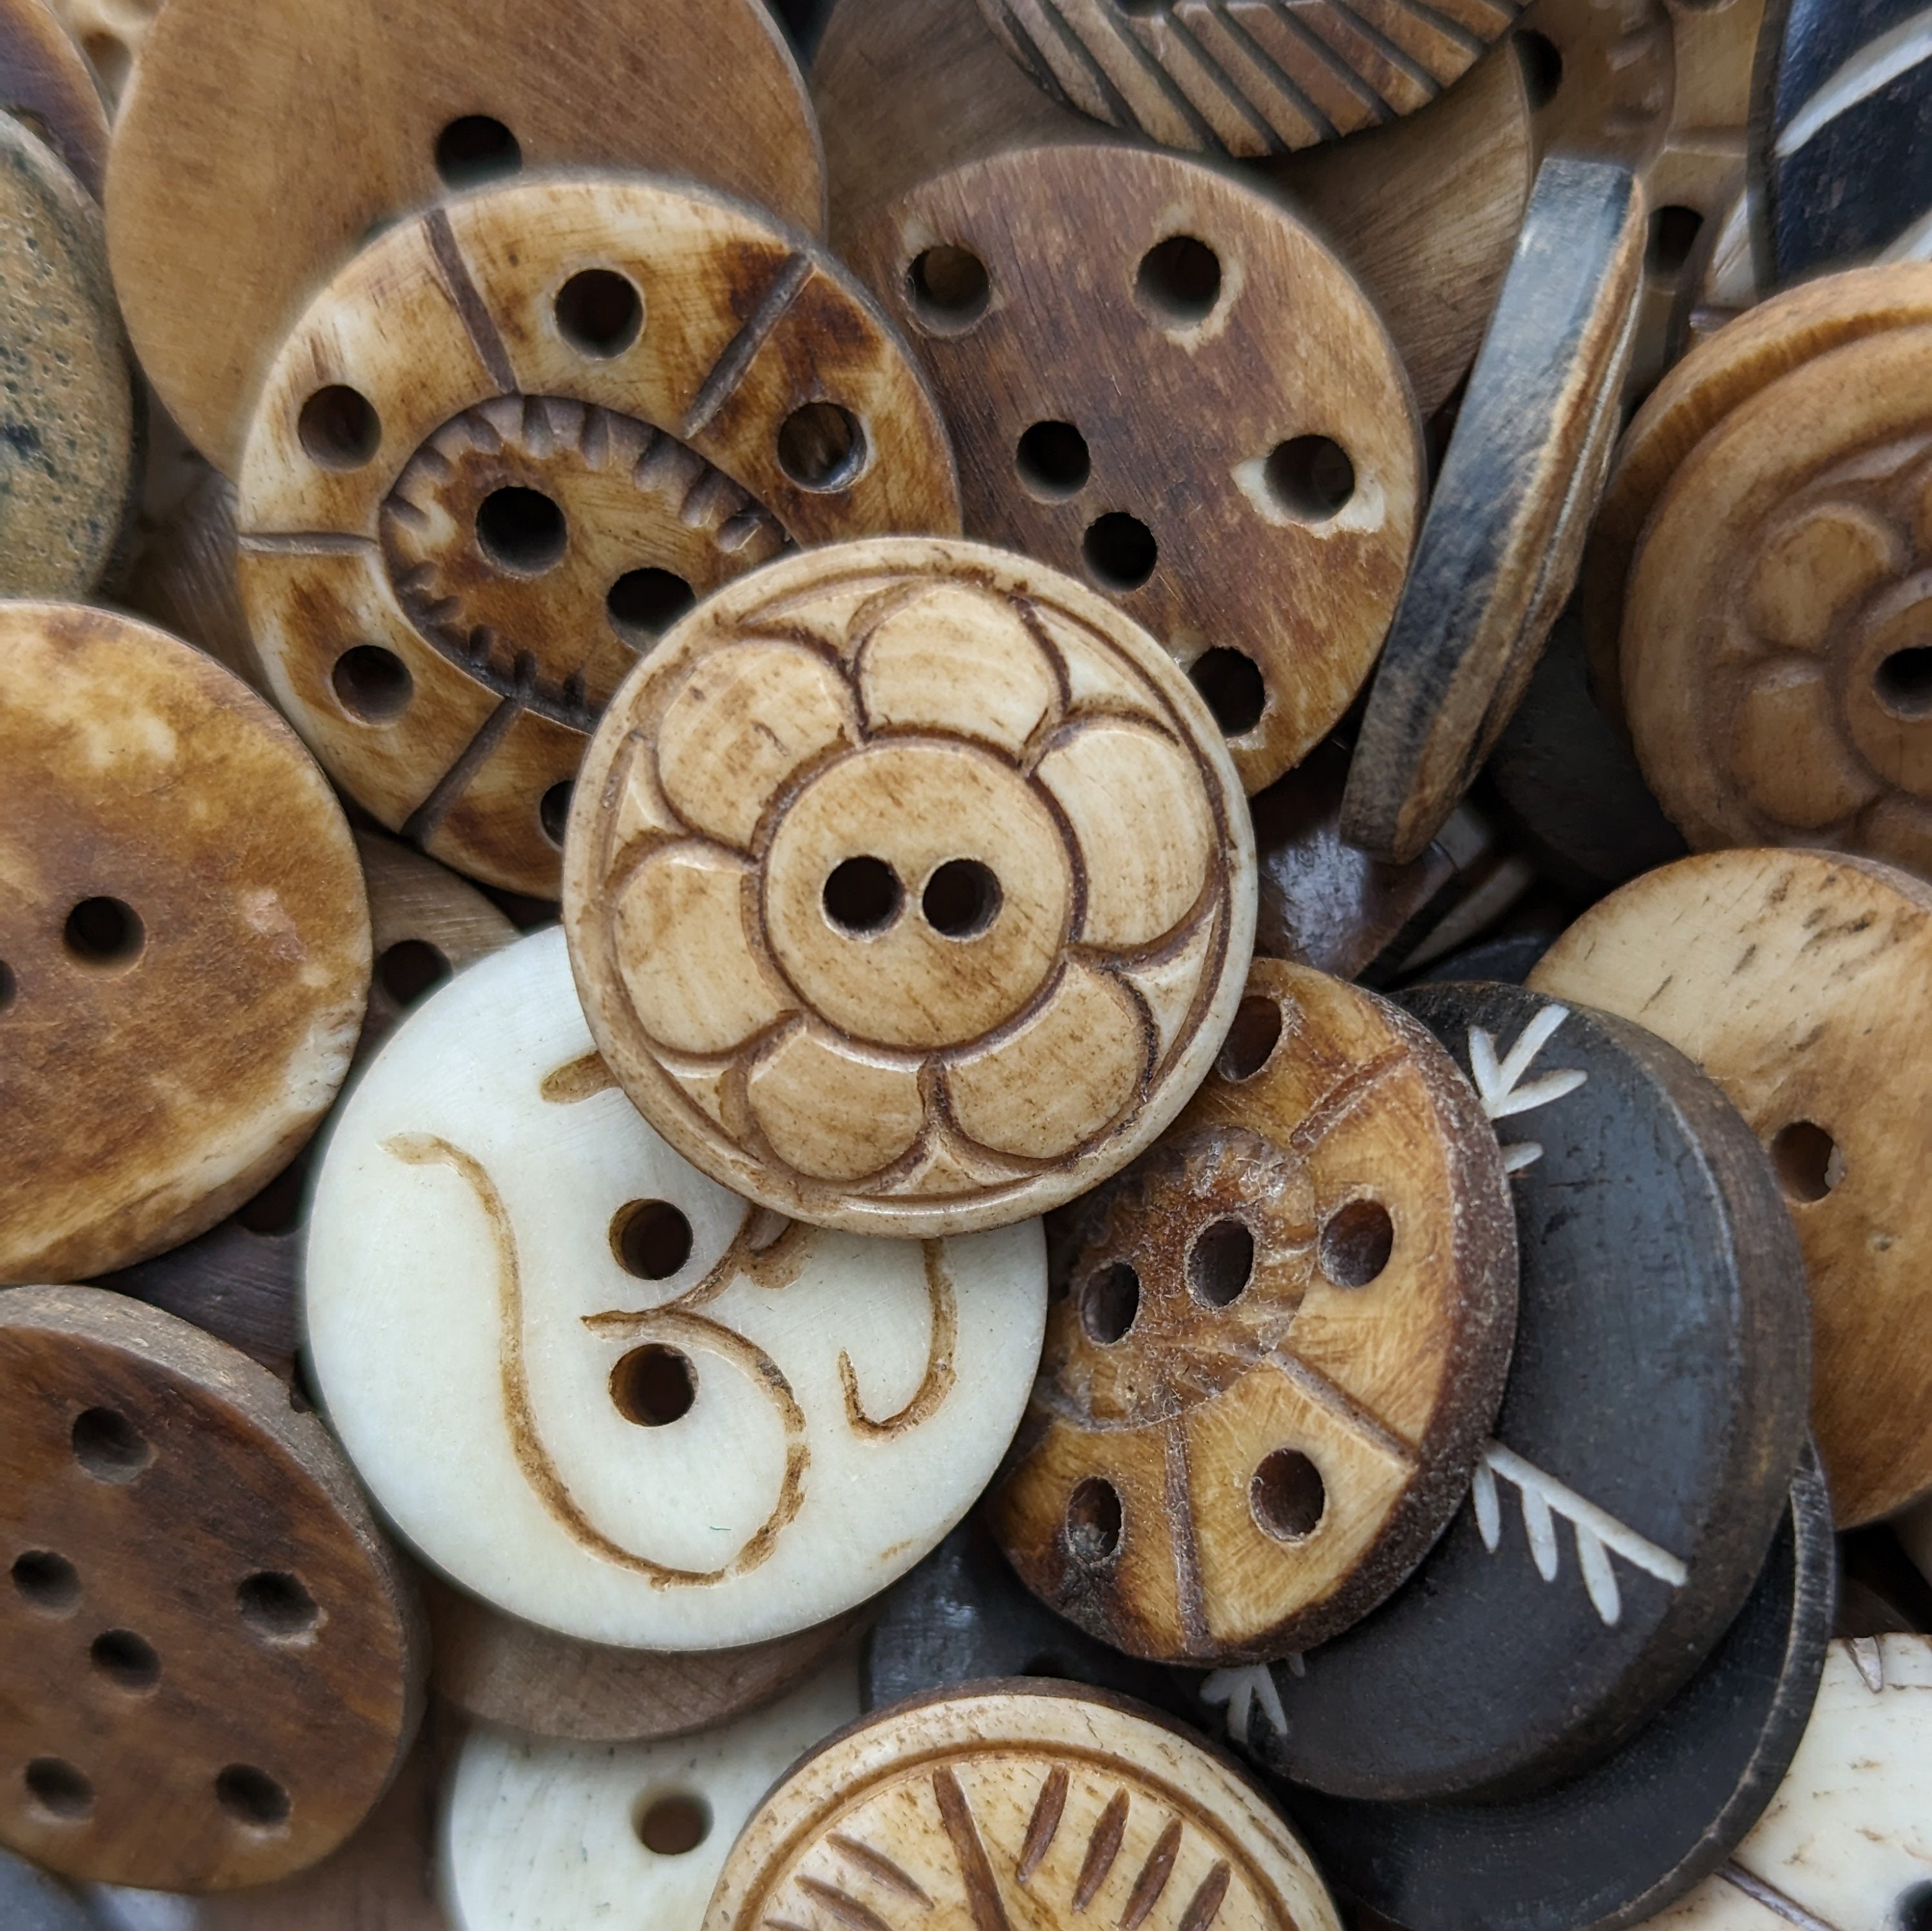  Set of 10 Premium Genuine Brown Horn Buttons 25mm 1 Inch for  Pea Coats, Overcoats, Winter Coats, Trench Coats ,Q2640